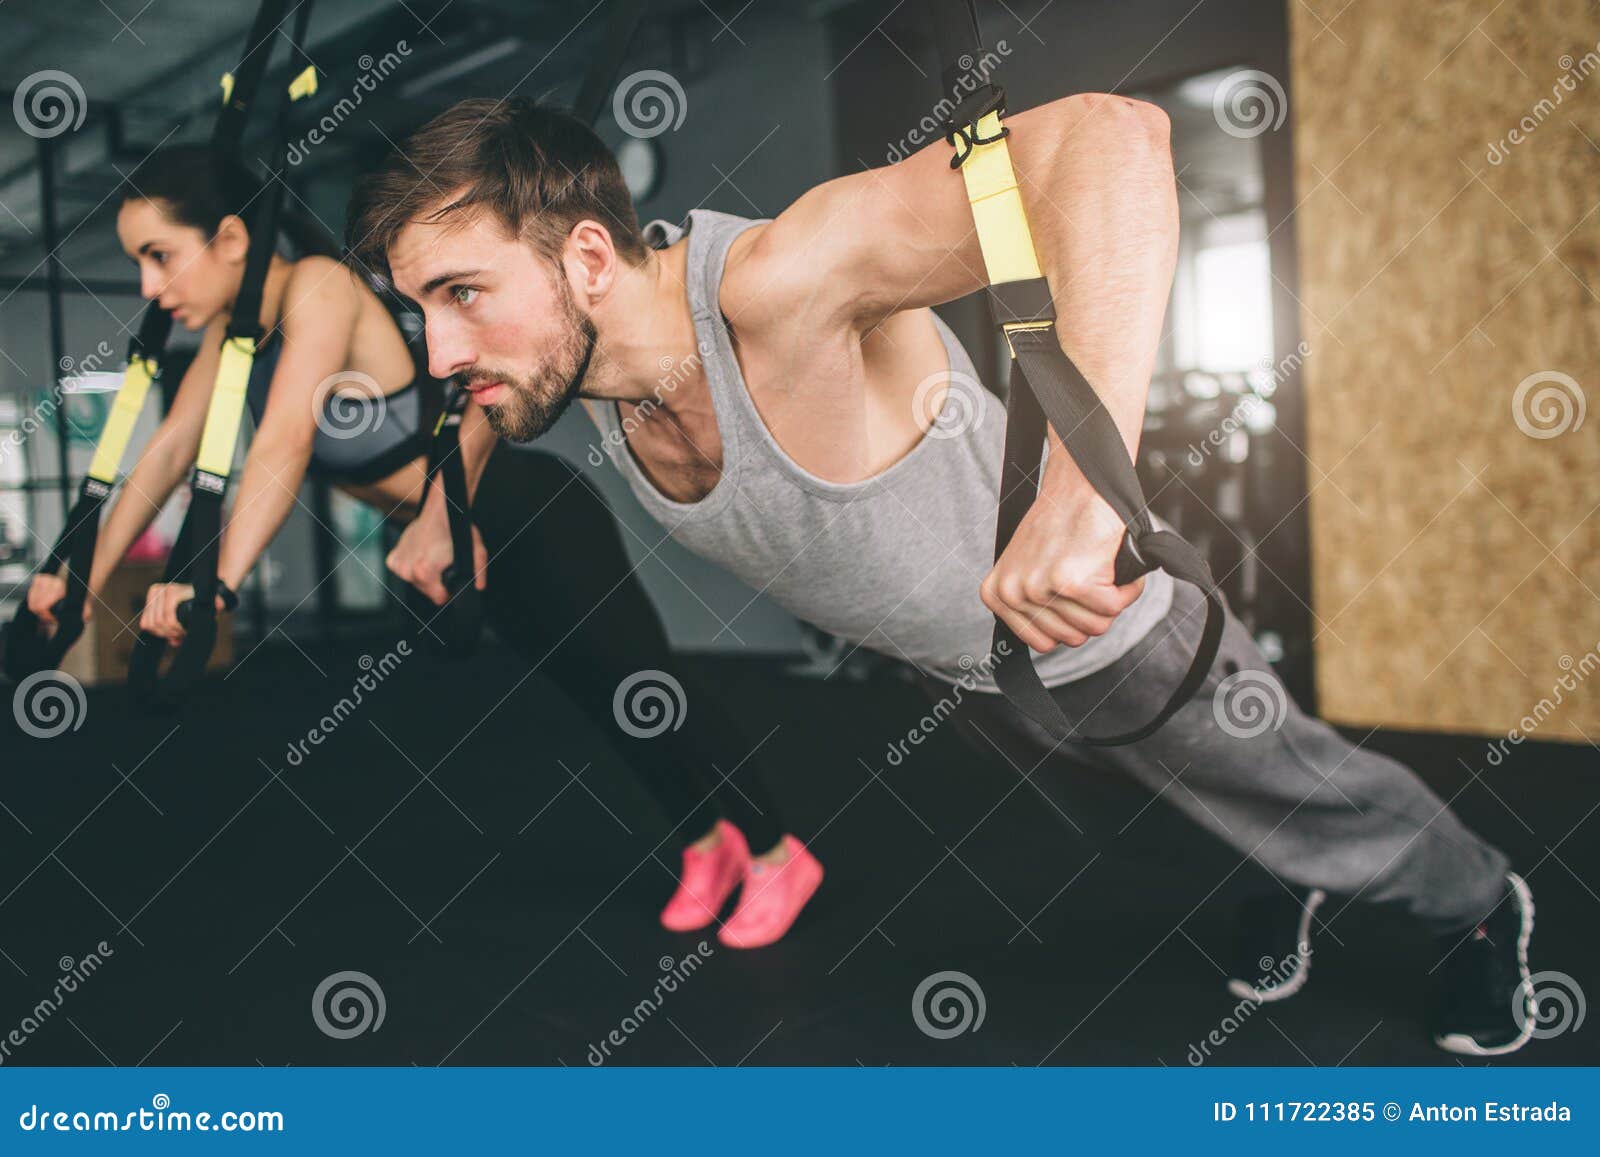 Young Man And Woman Are Doing Trx Chest Press Exercise He Is Doing Push Up While She Is Doing Oush Down Close Up Cut Stock Image Image Of Male Balance